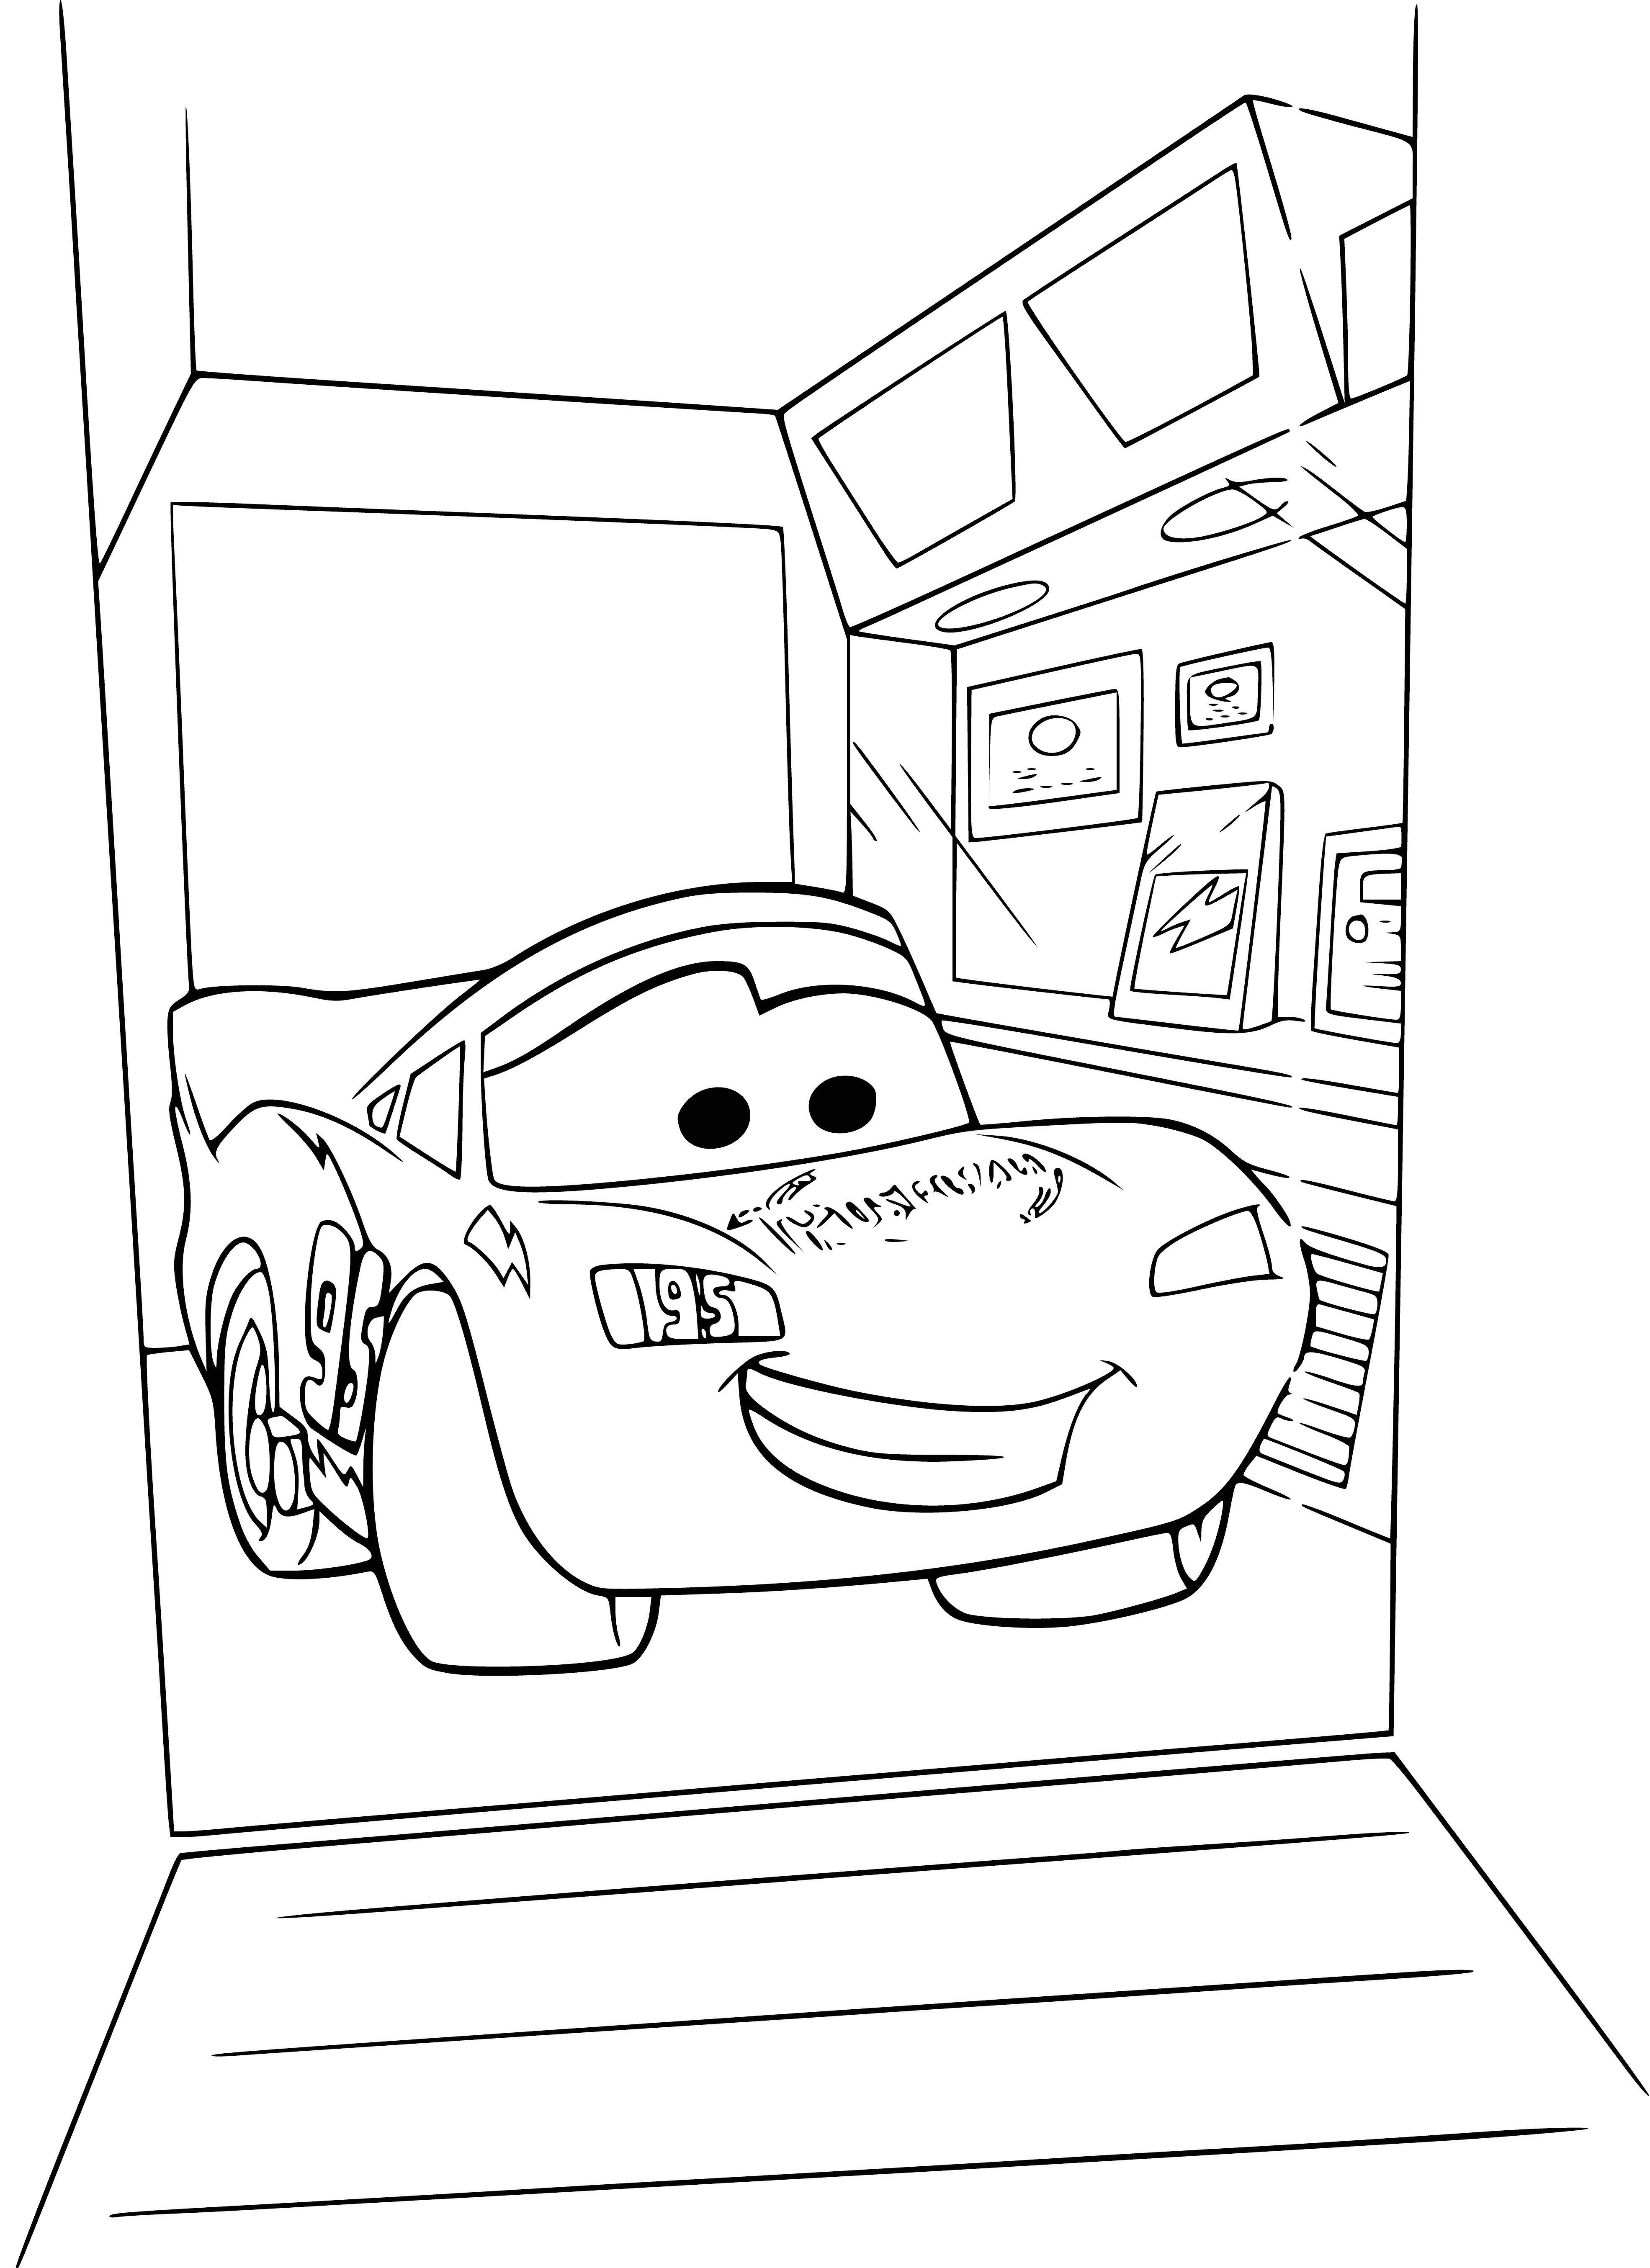 coloring page: Lightning McQueen is a red race car w/ blue & yellow stripes, "95" on doors & green eyes, chrome headlights + gray eyebrows.